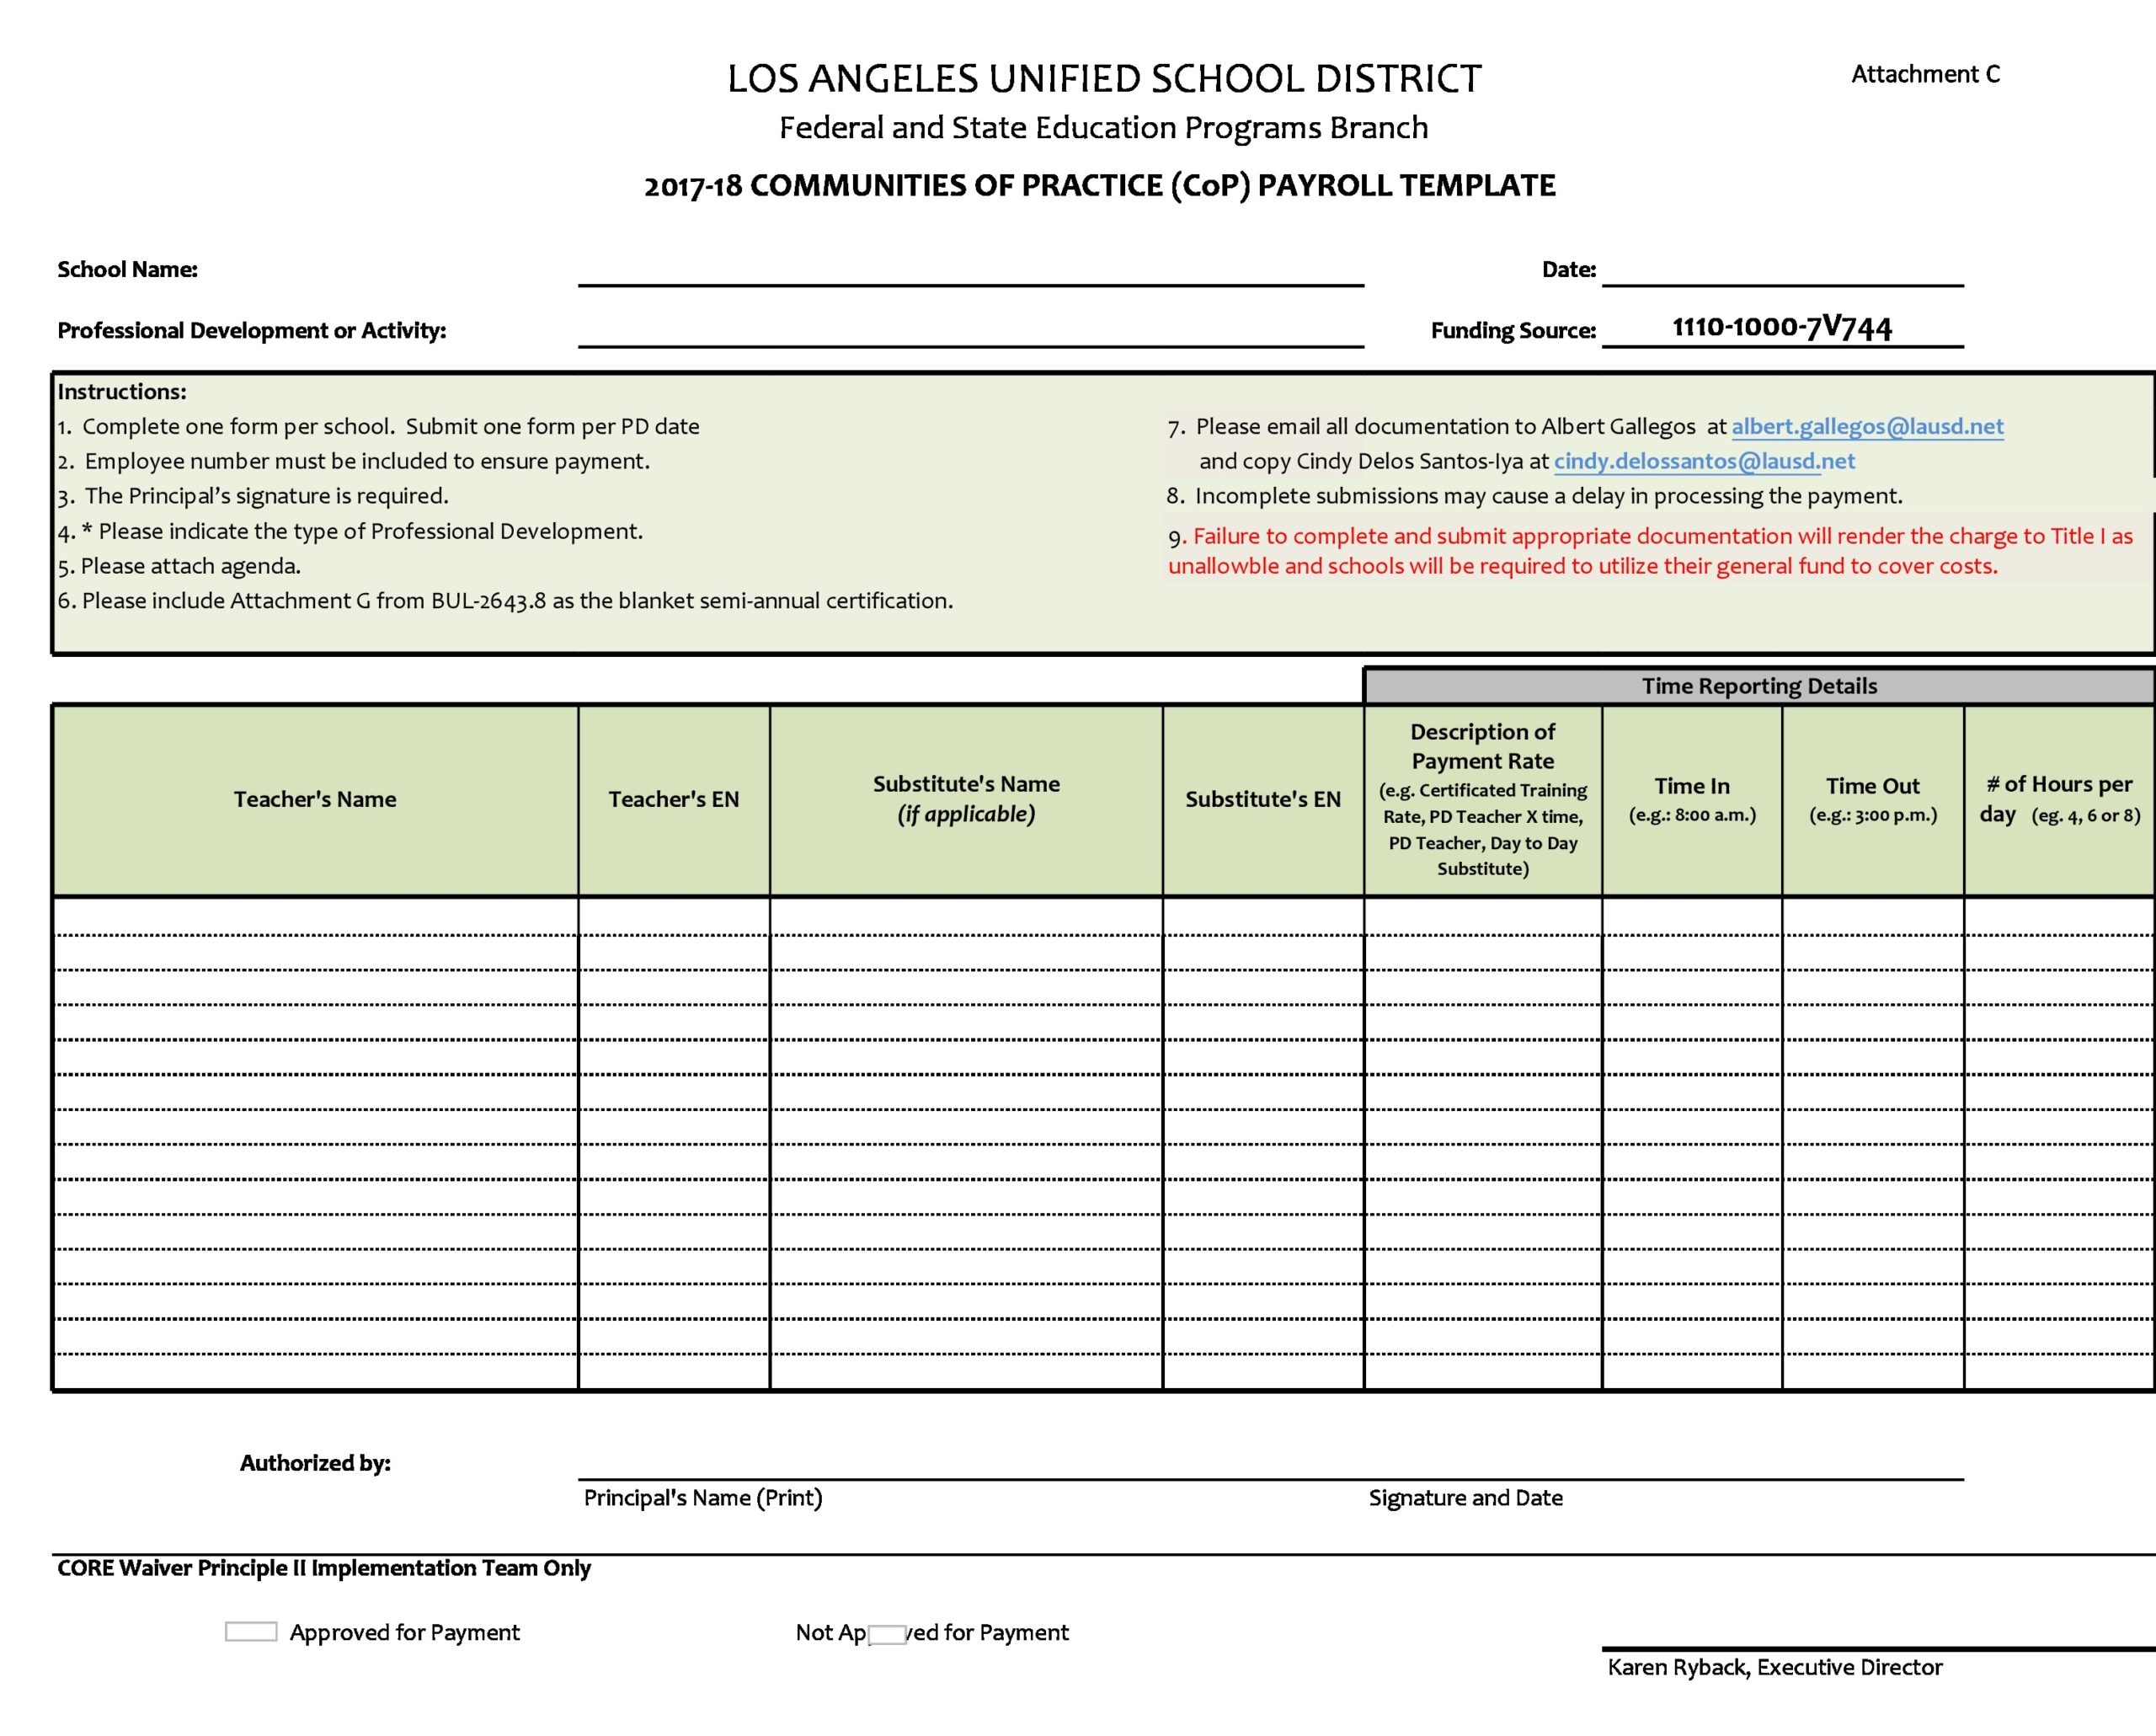 payroll system excel template